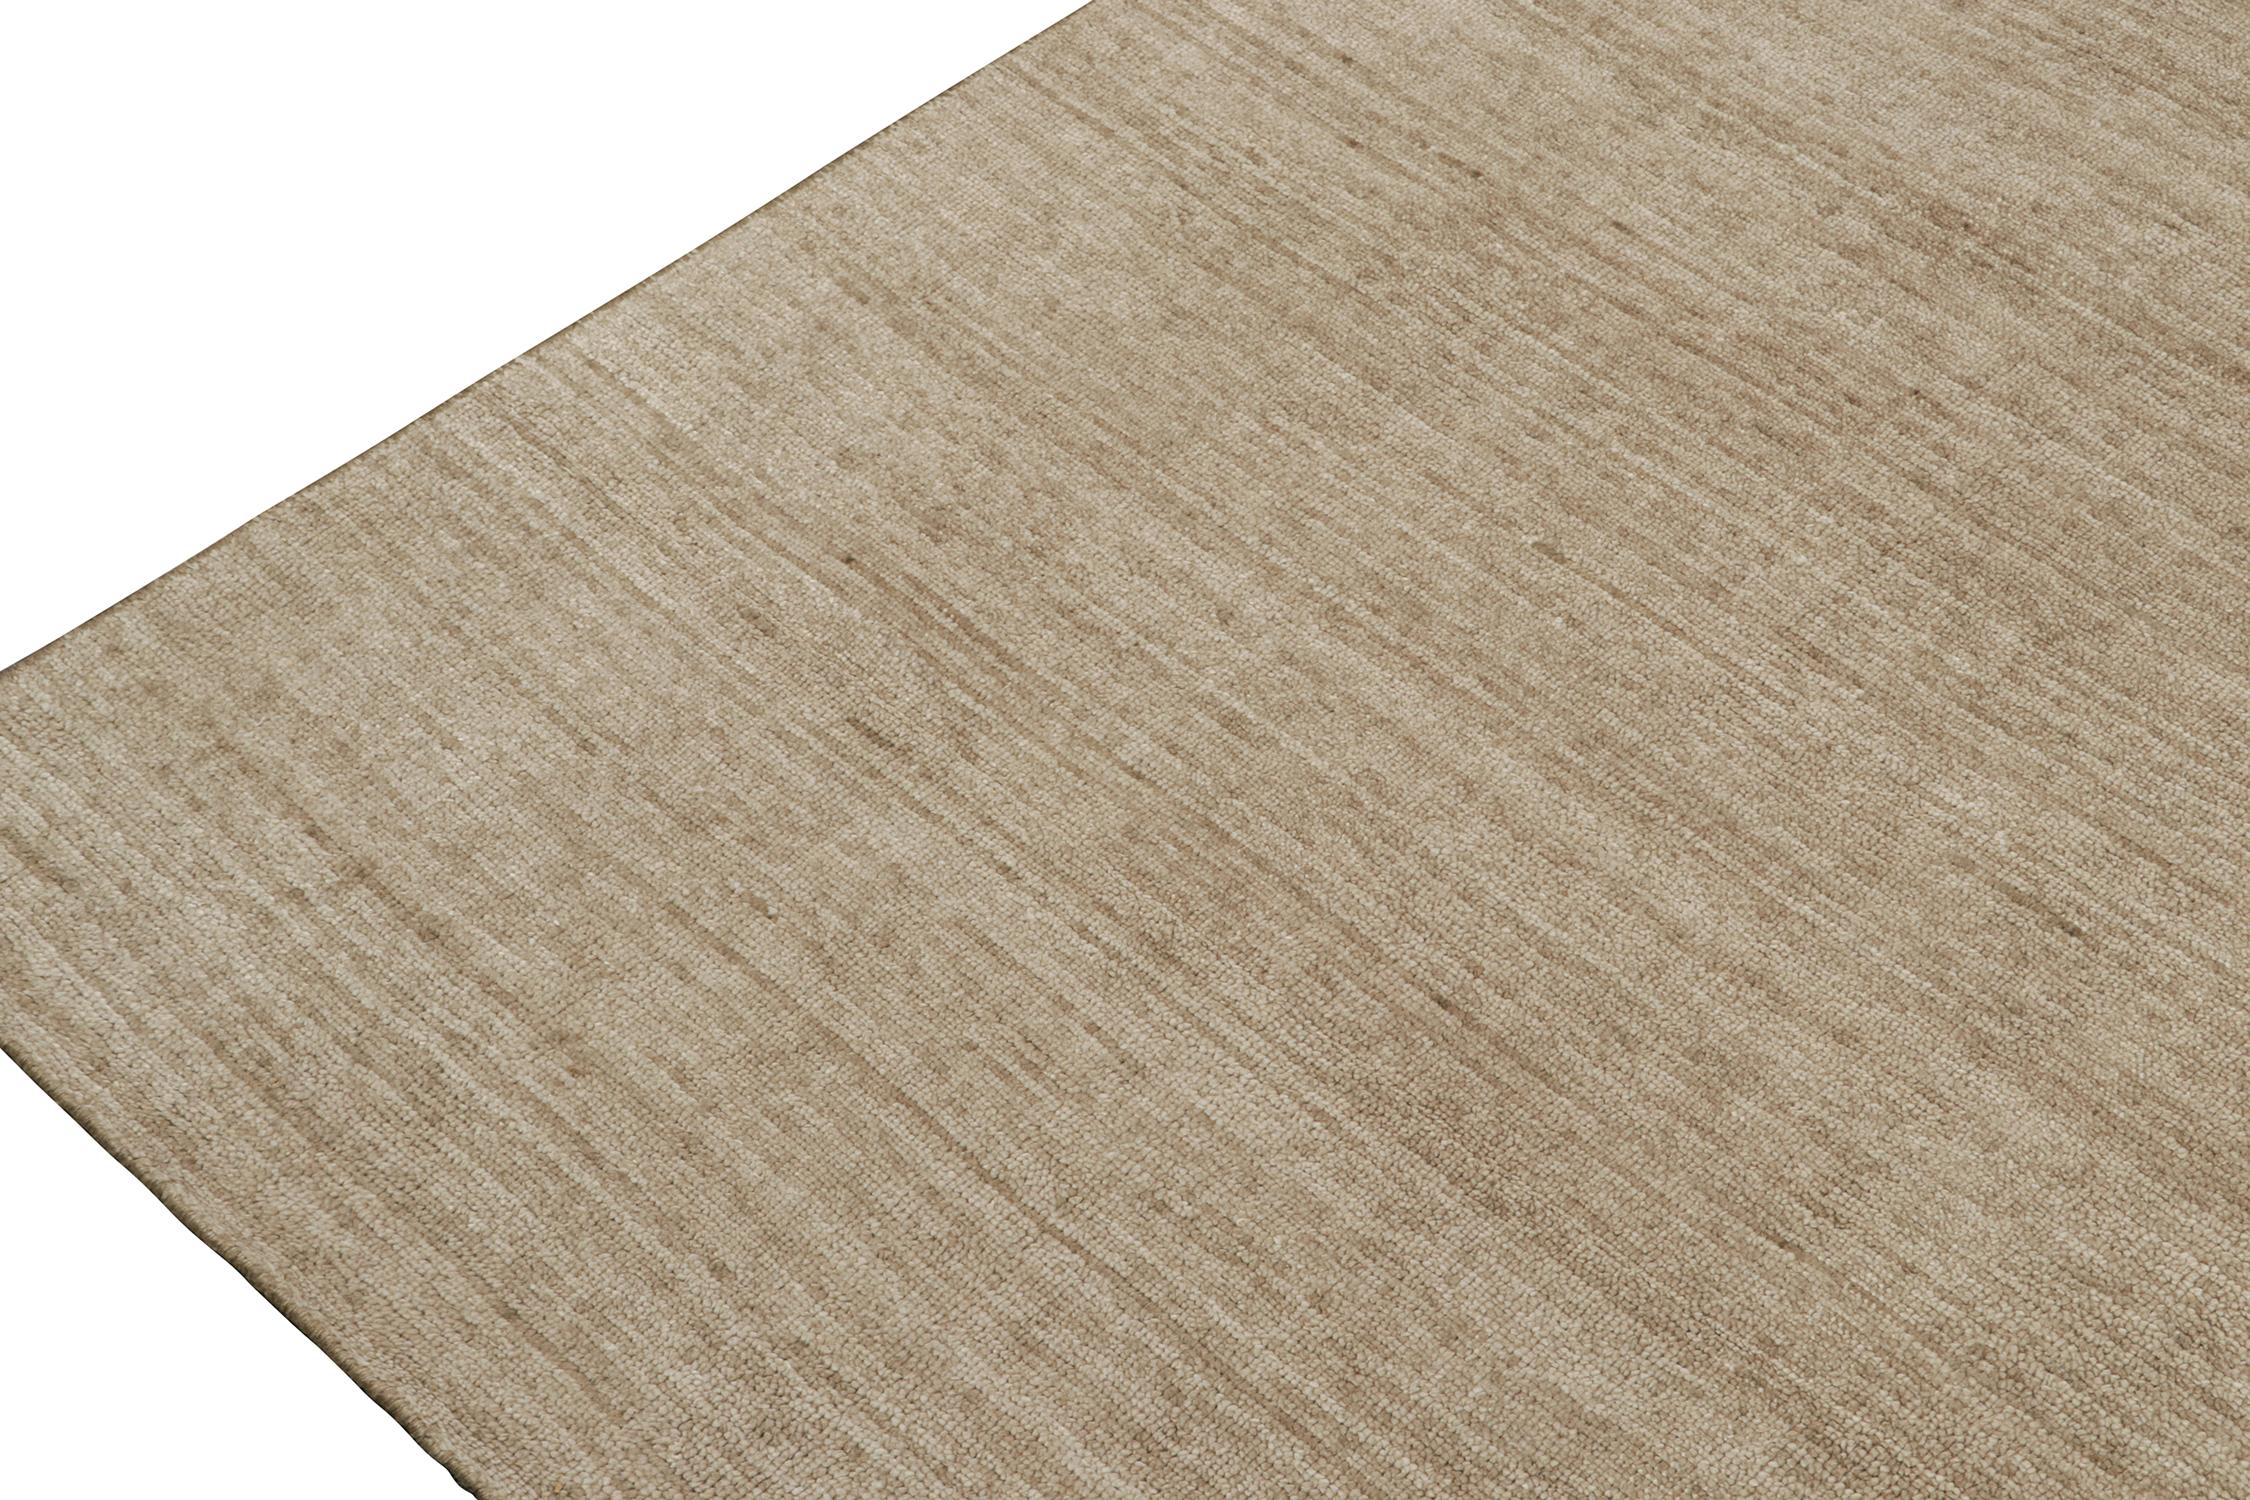 Contemporary Rug & Kilim’s Plain Modern Rug in Beige-Brown Tone-on-Tone For Sale